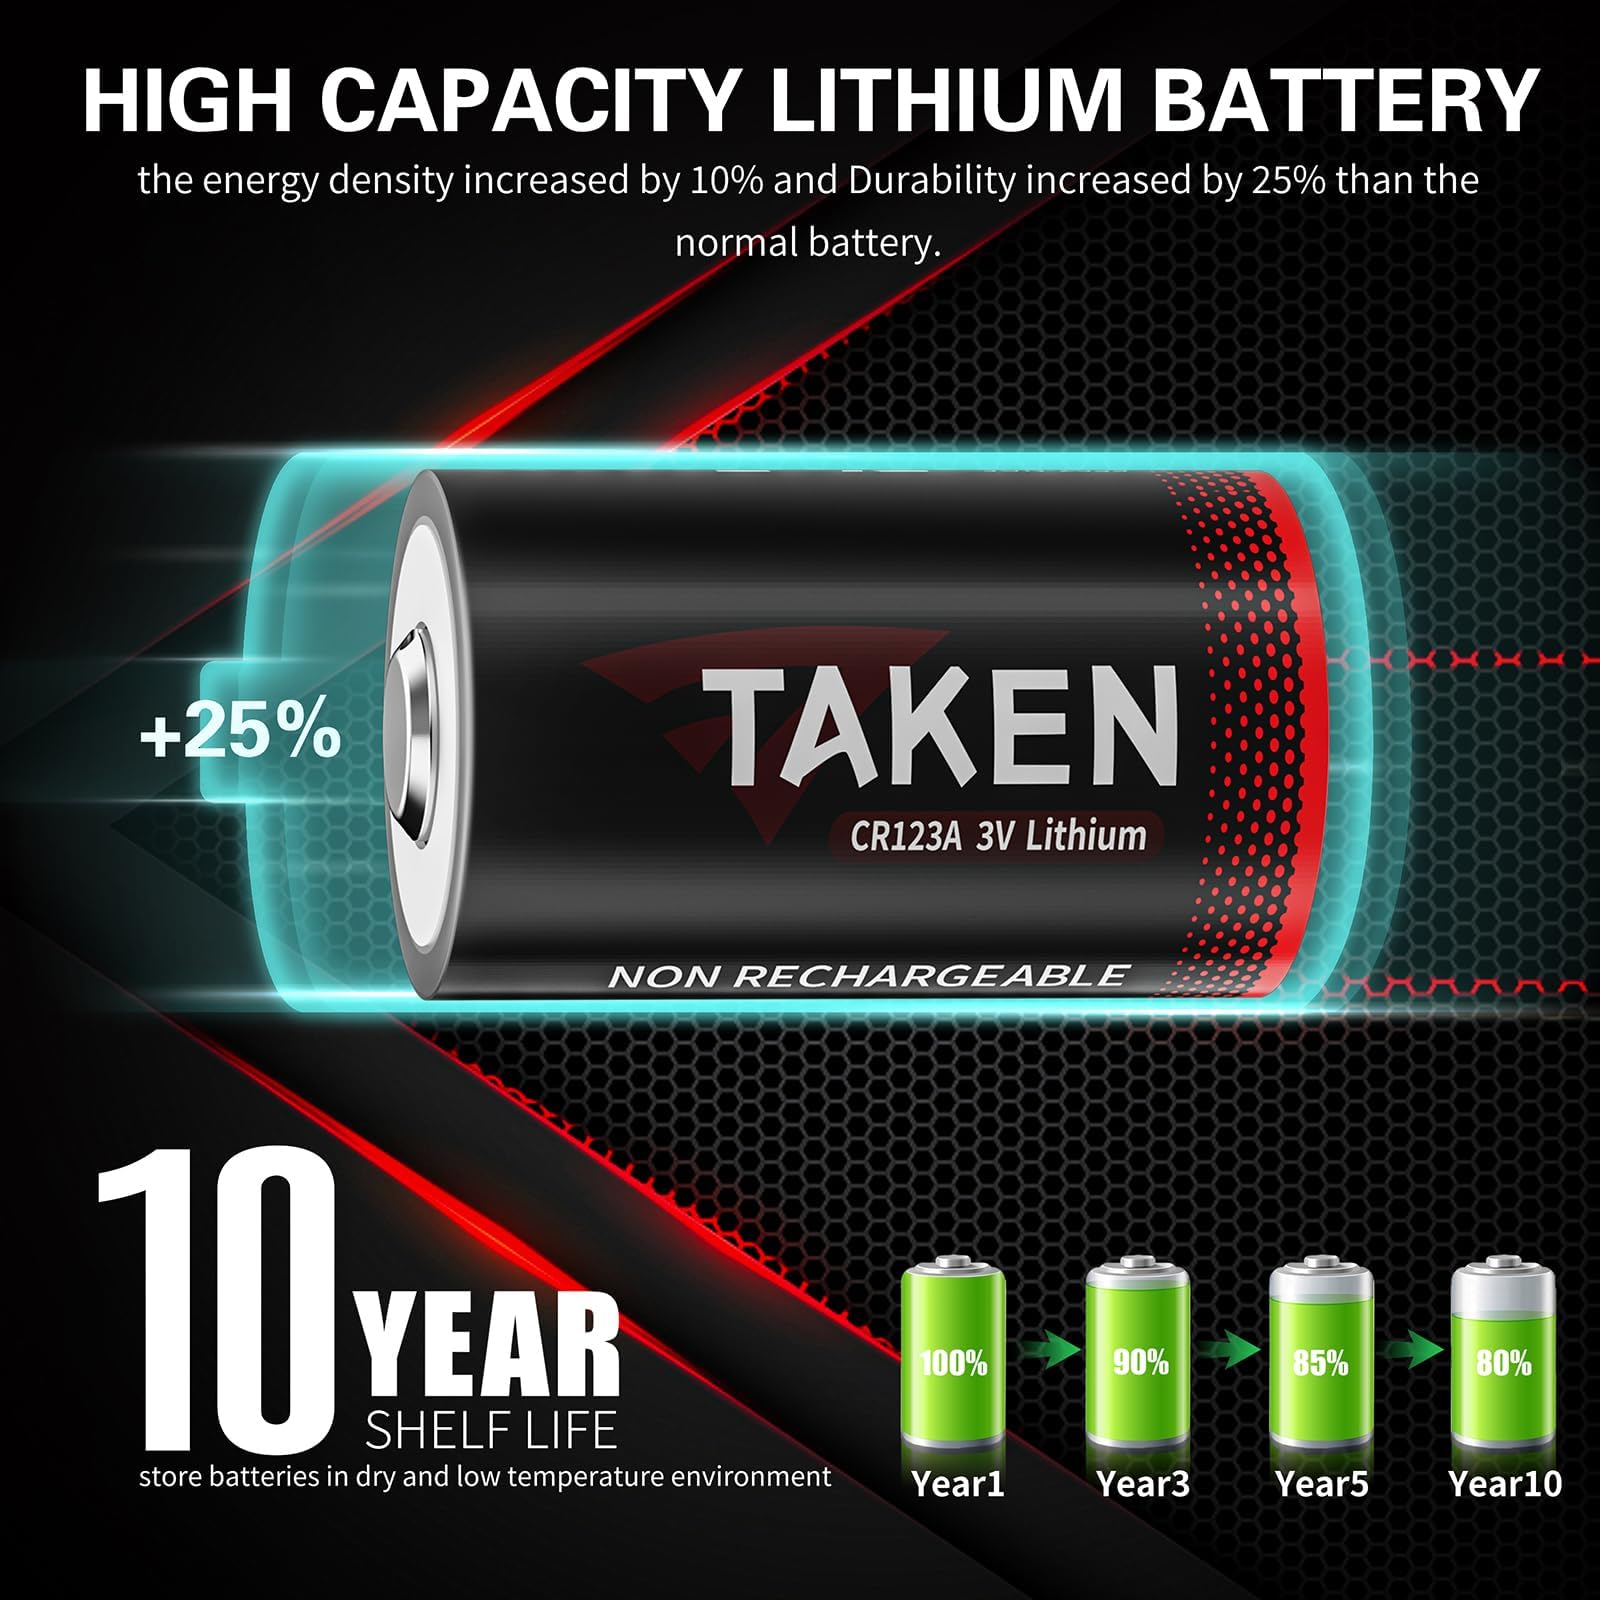 Lithium 123 Batteries for Flashlight, Camera, Alarm System, Security Device, Microphone High Performance CR123A 3V Lithium Battery 1600mAh 24 Pack